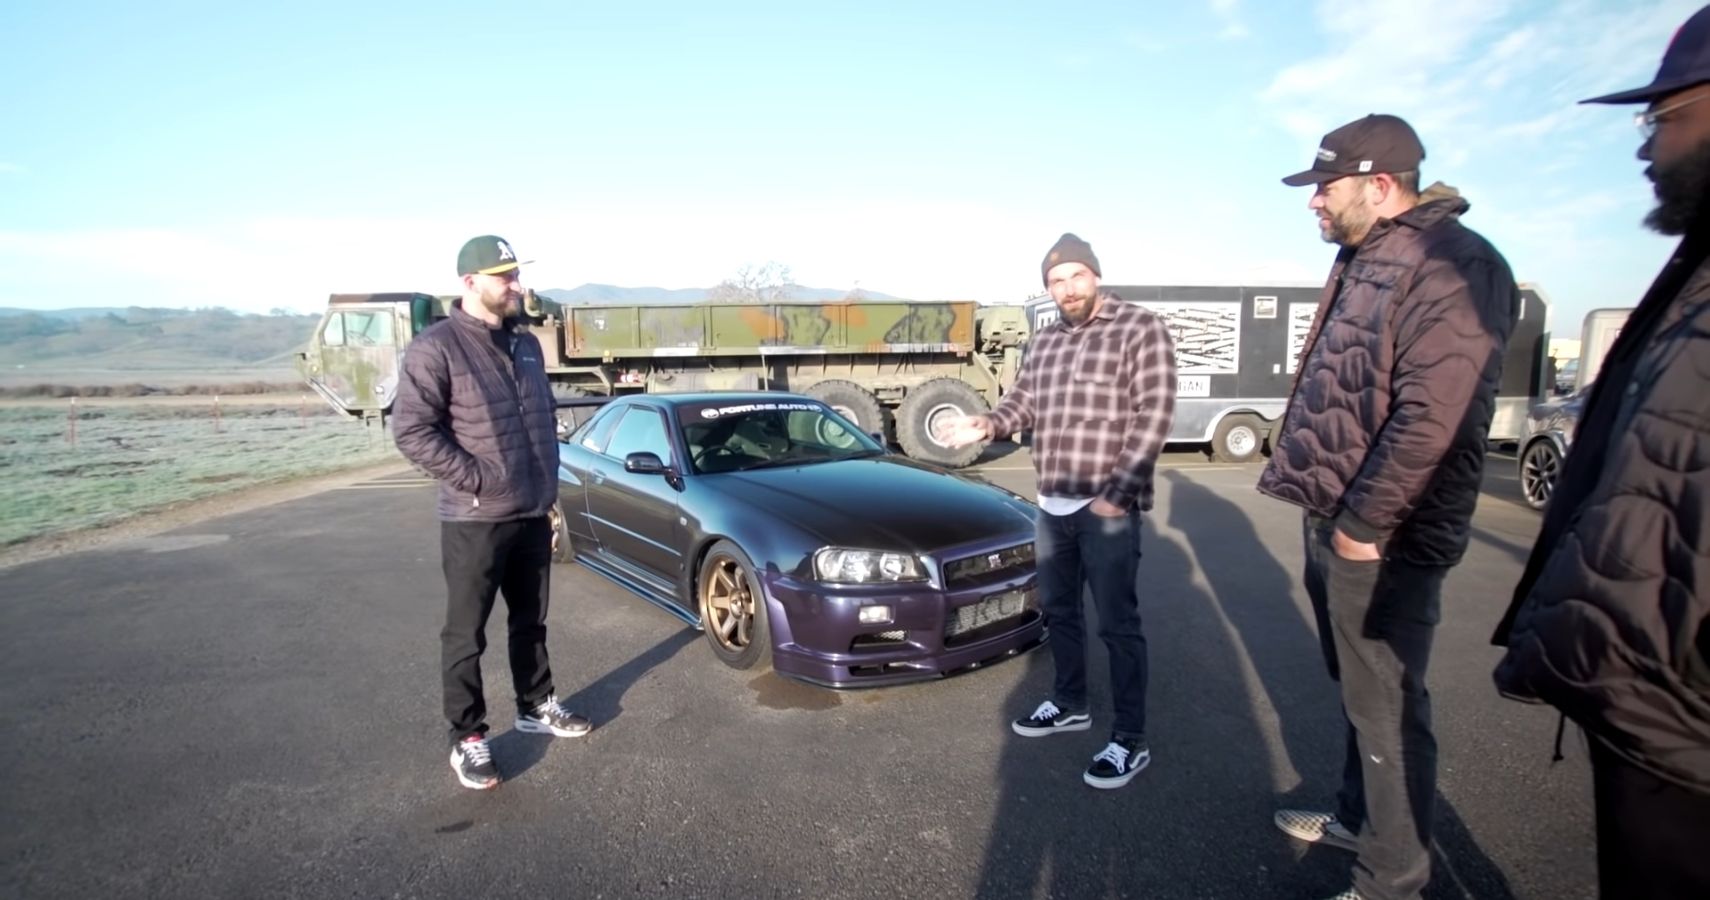 This vs Plaid R34 Skyline Full View With Brad And Hoonigan Crew